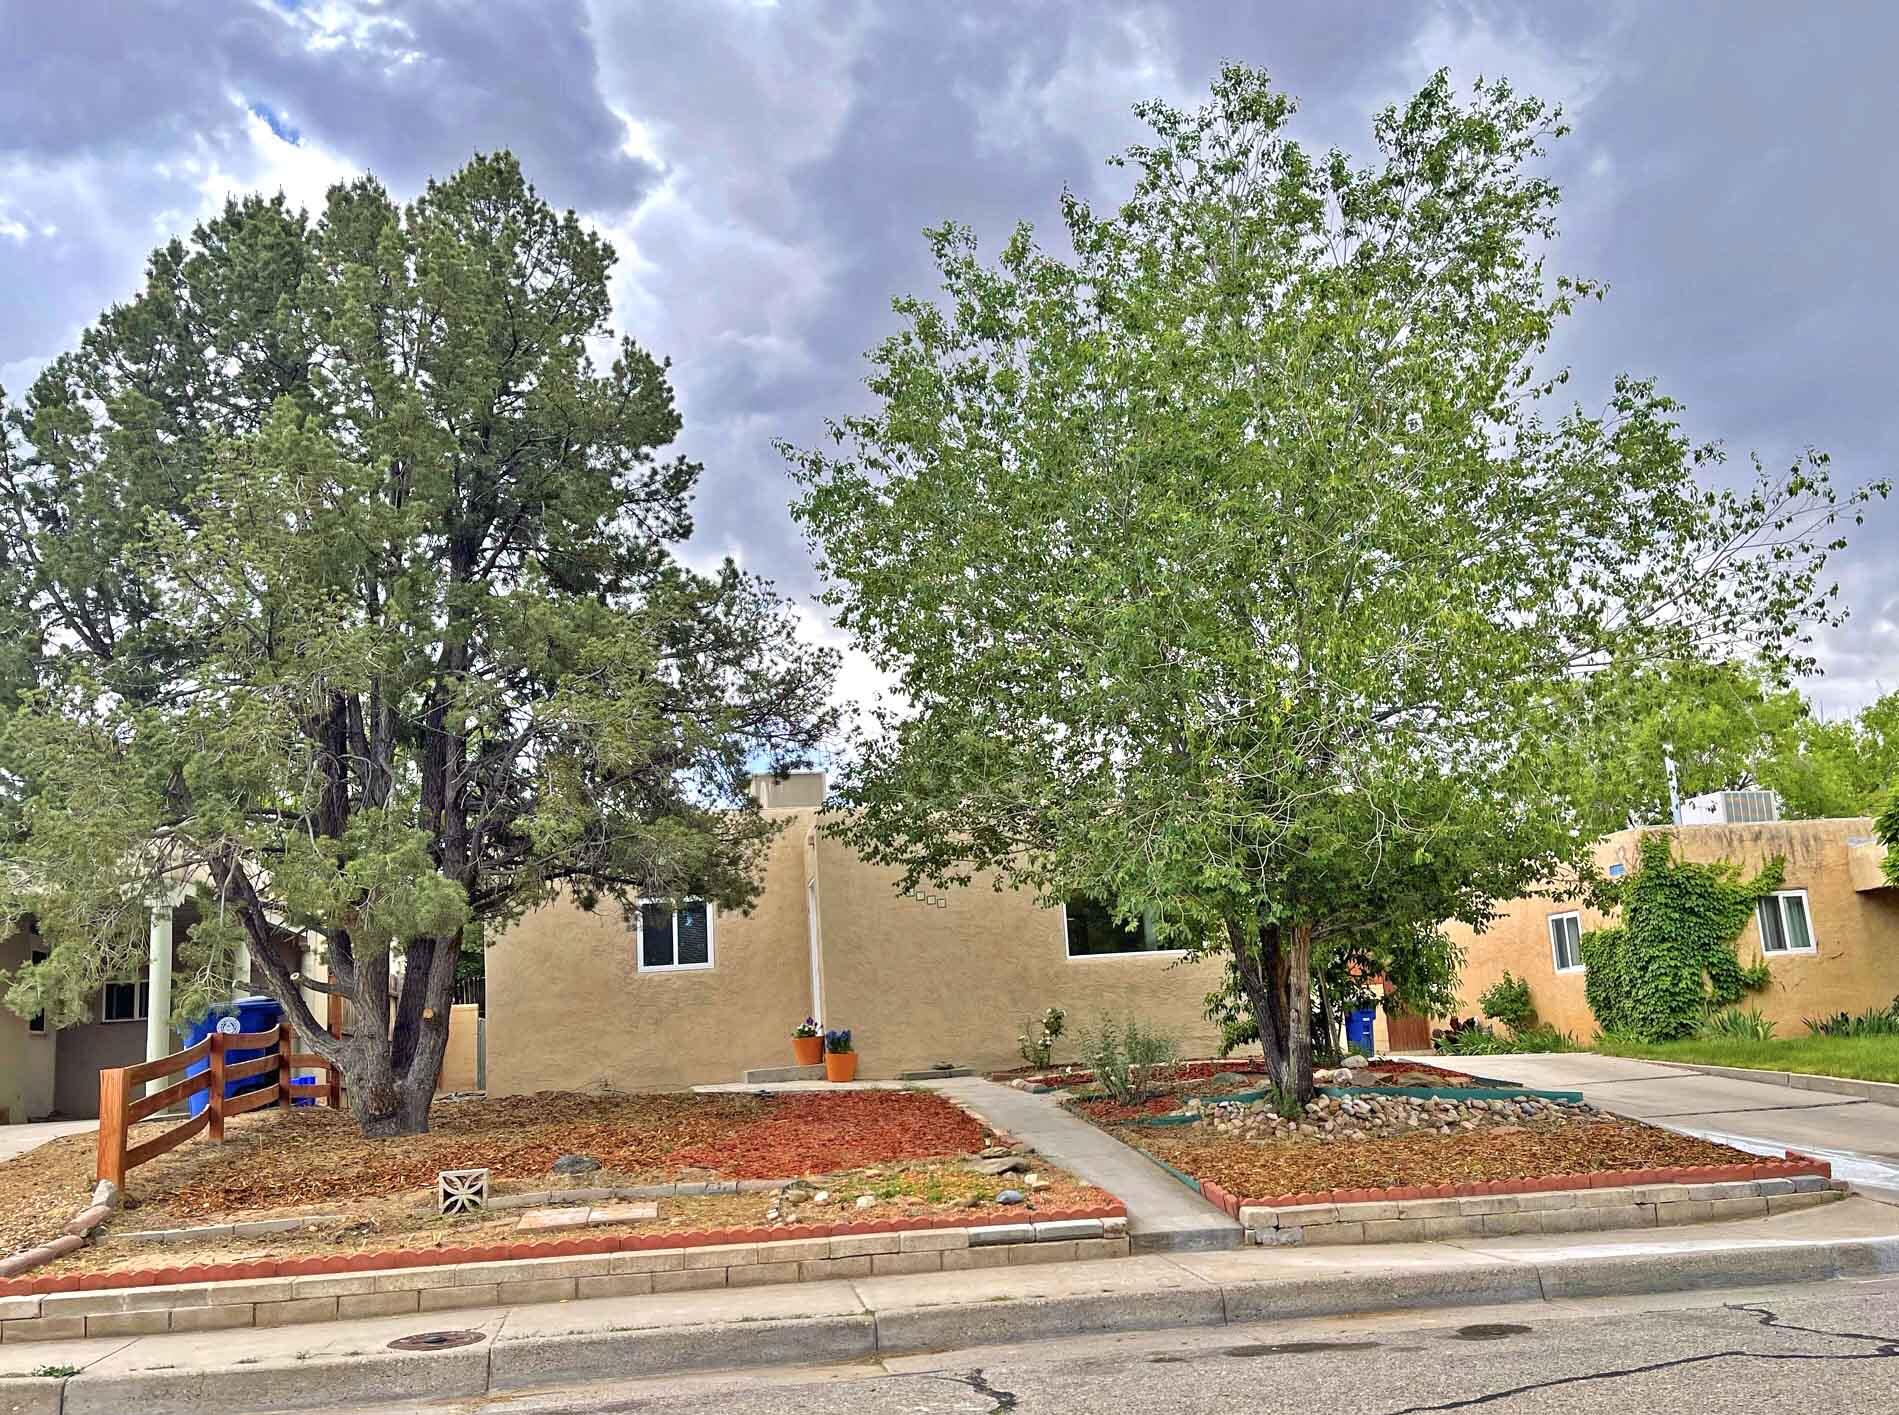 Charming Home near Ridgecrest in Victory Hills area SE Heights with Nob Hill, UNM, & the Airport just a short distance away. This custom 3 bd, 2+ bath home has tons of potential, being sold  with all the appliances. The roof was recently replaced & upgraded to TPO and has a transferable 5 yr warranty to the new Buyer. New stucco coat. Brand new carpet in the west bedroom with separate entrance. Two large living areas! Original refinished wood floors in front part of home. Large 140 sf workshop/storage in the backyard. Home is freshly painted. Walking distance to Bandelier Elementary & the sport stadiums. Home is in a nice quite neighborhood with lots of parks to enjoy nearby. See attached Seller list of Updates. Be sure to put this one on your list!